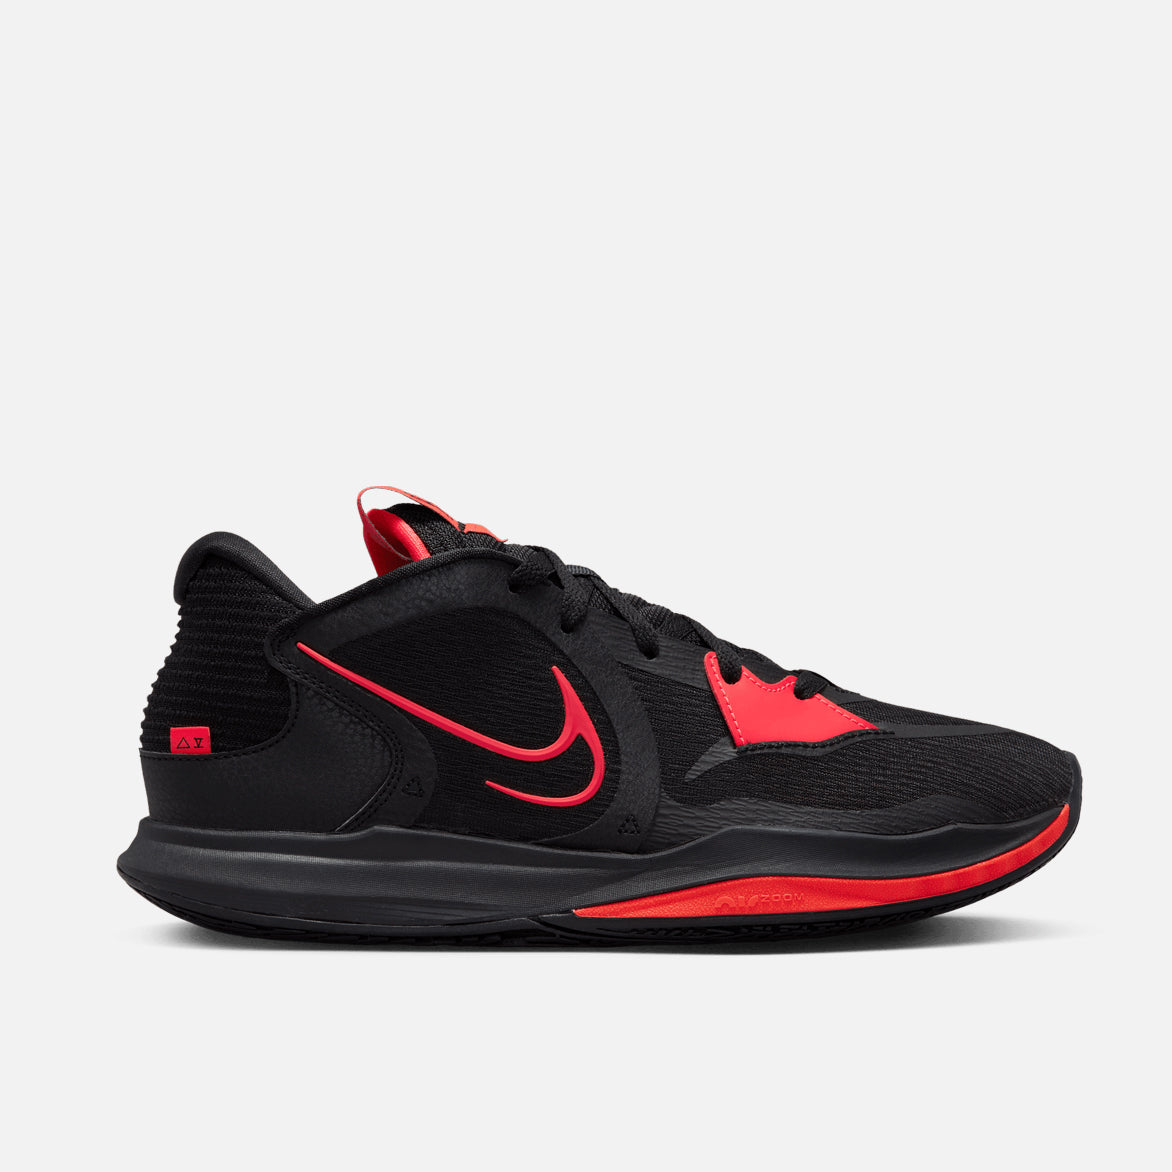 kyrie 5 red and black